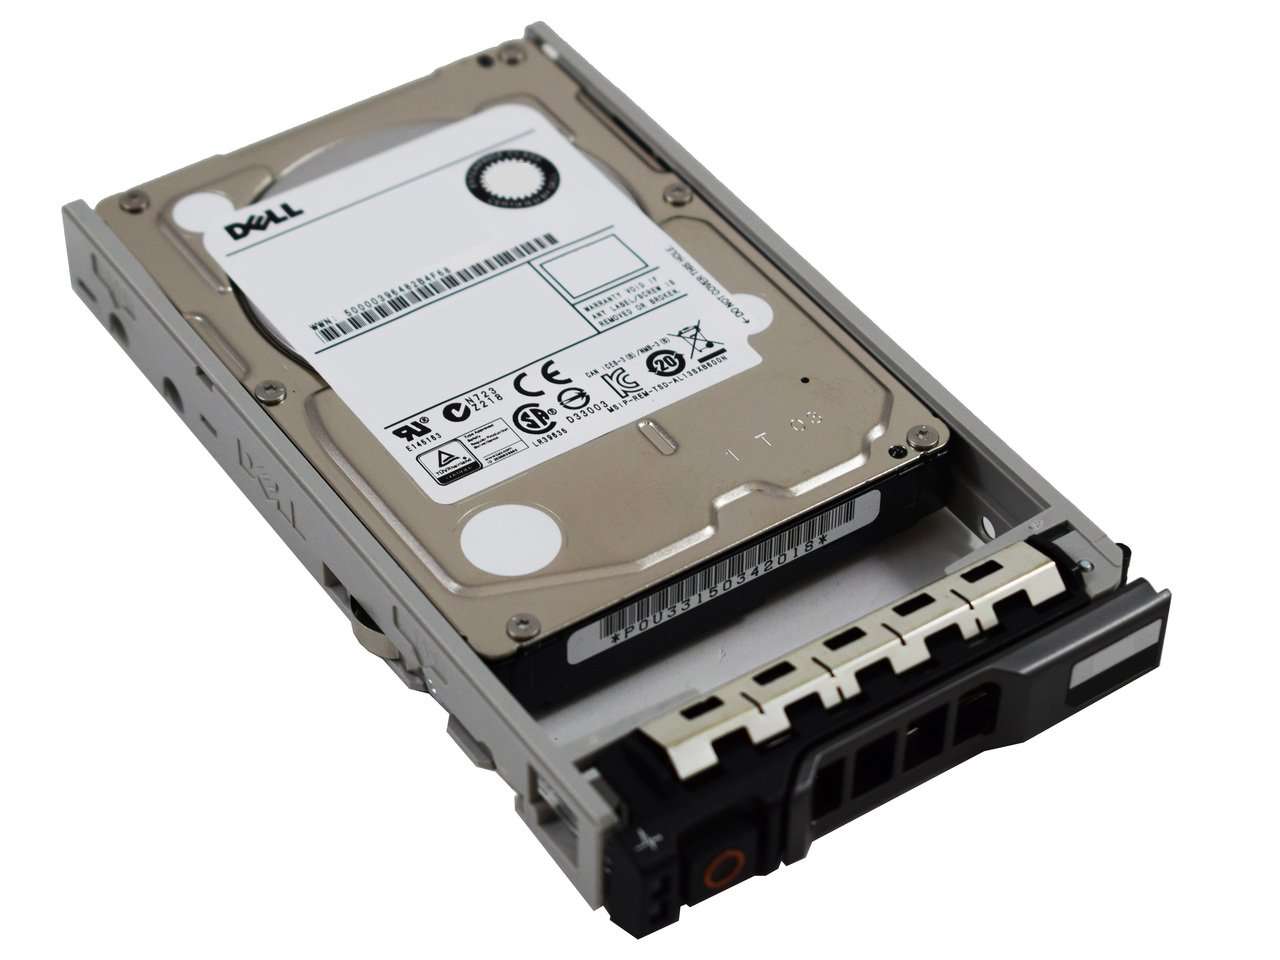 Dell G13 400-21031 600GB 10K RPM SAS 6Gb/s 512n 2.5" Manufacturer Recertified HDD